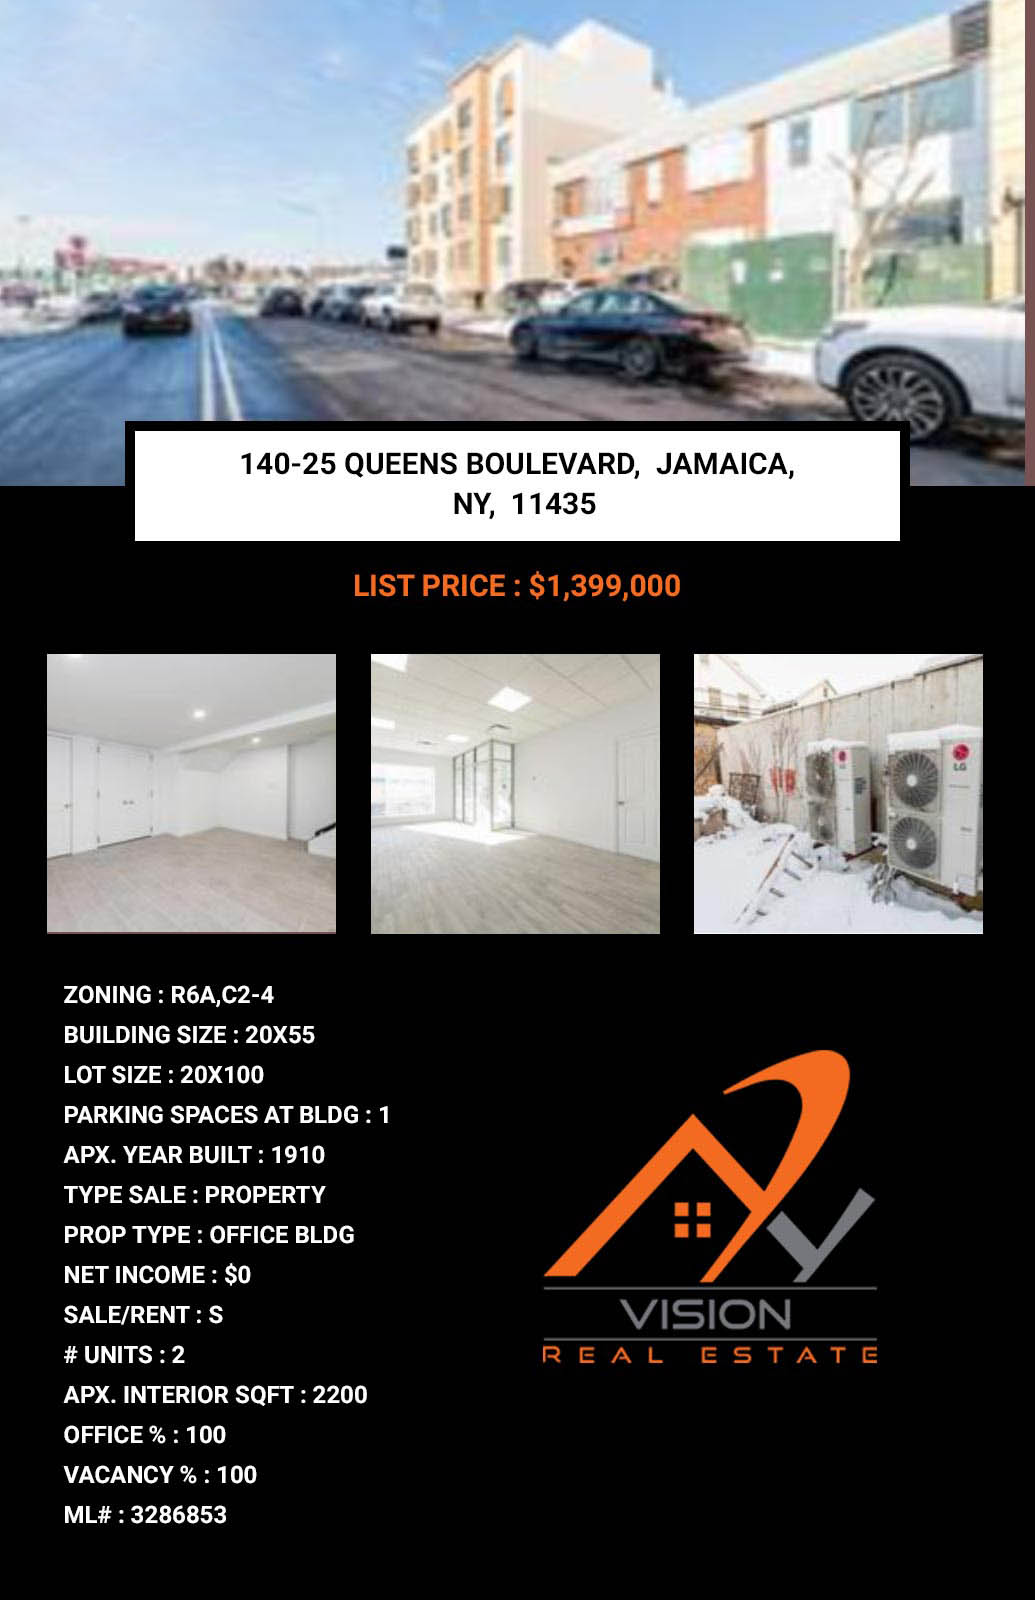 Commercial Property For Sale Jamaica